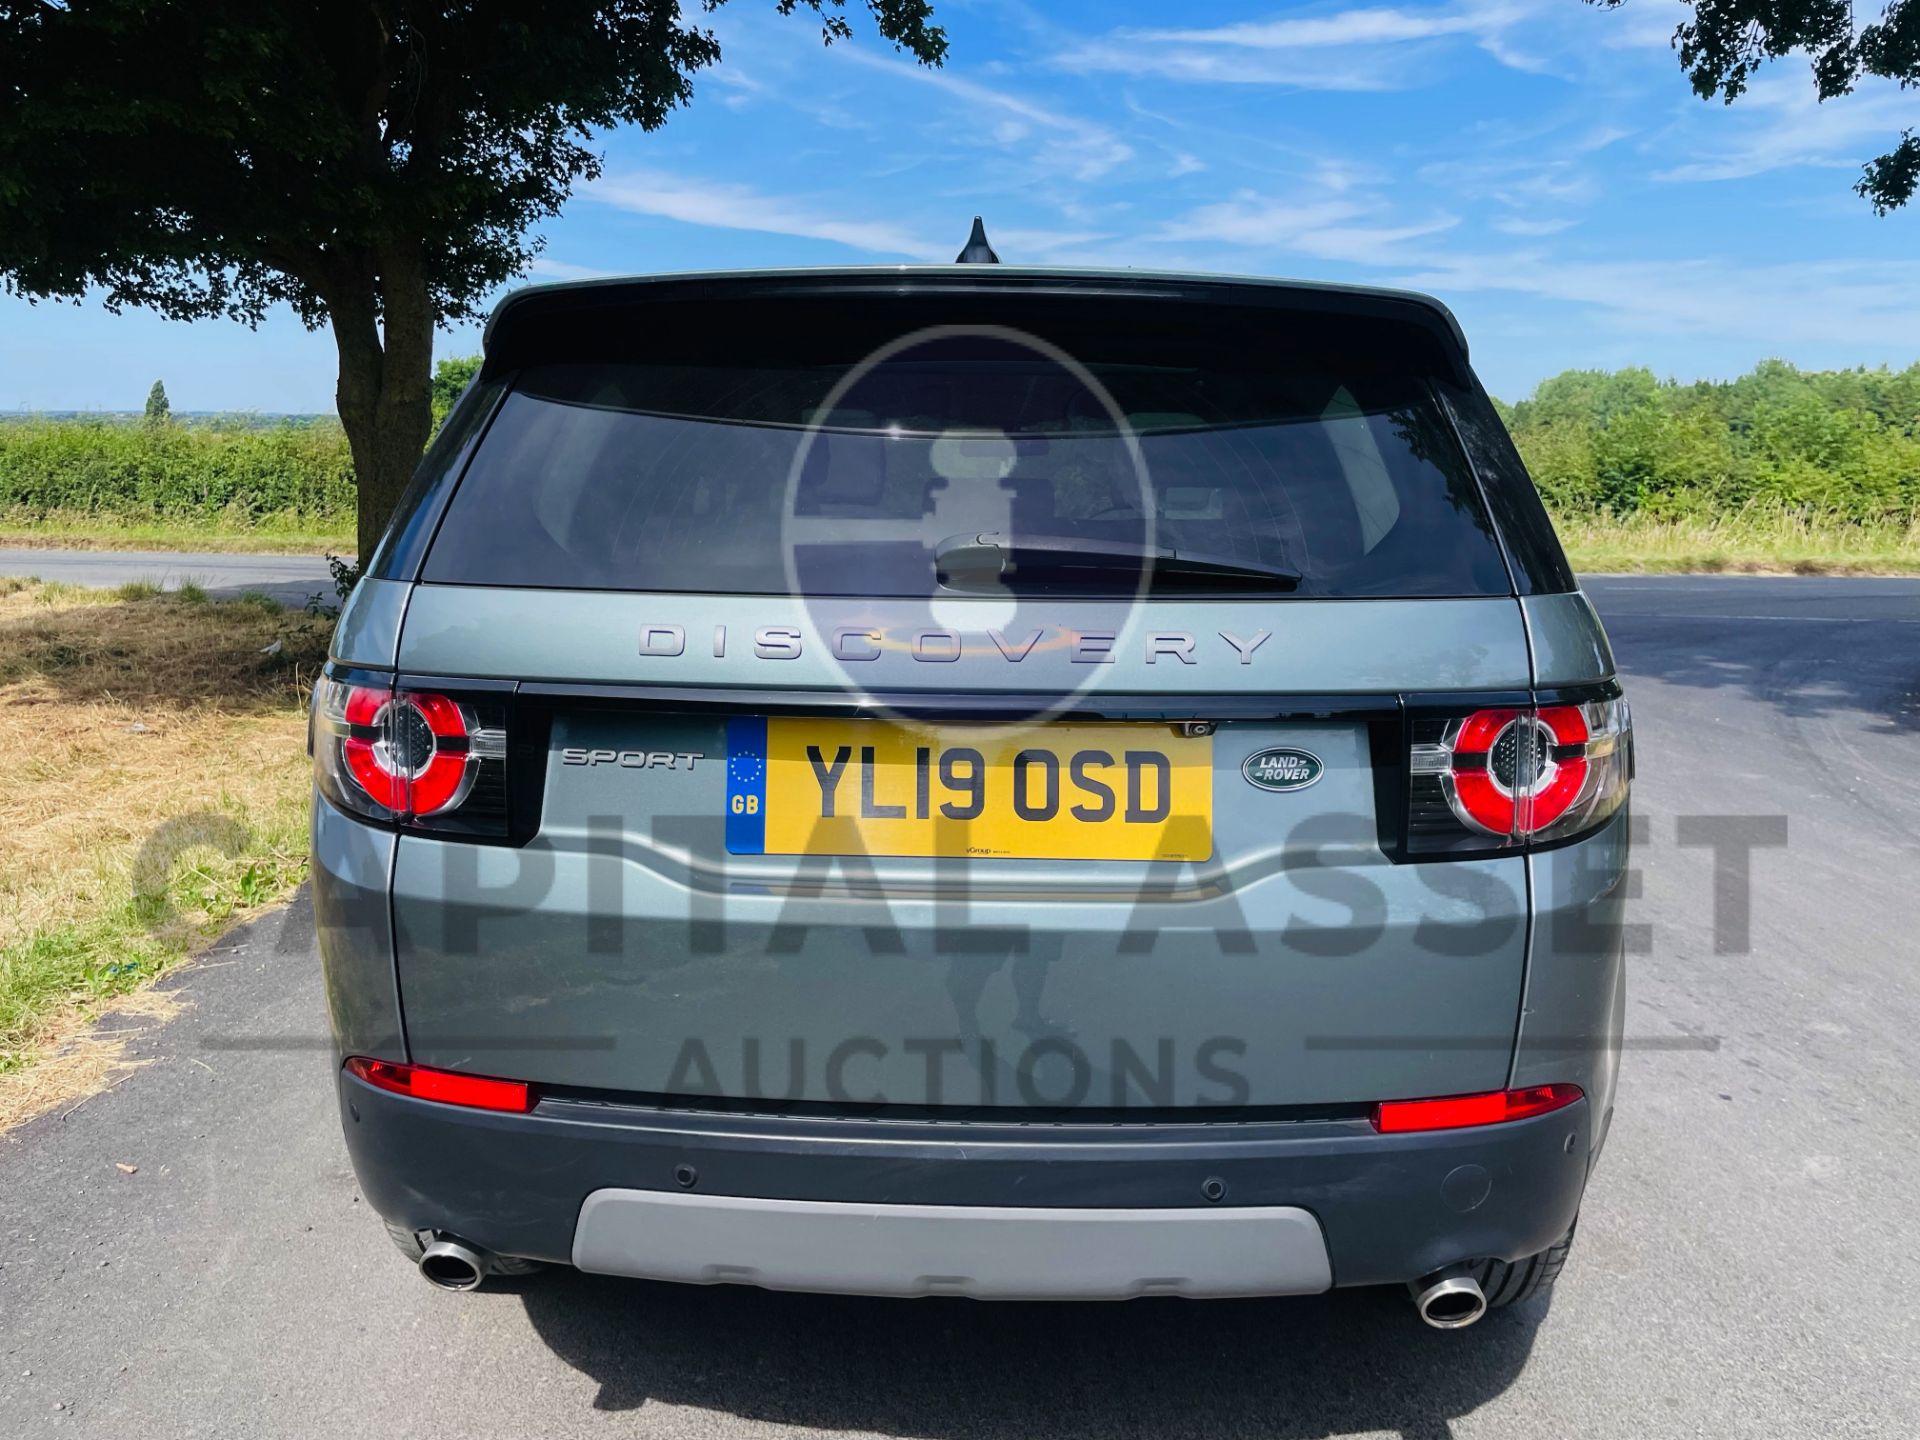 (On Sale) LAND ROVER DISCOVERY SPORT *SE TECH* SUV (2019 - EURO 6) 2.0 ED4 - STOP/START *HUGE SPEC* - Image 11 of 55